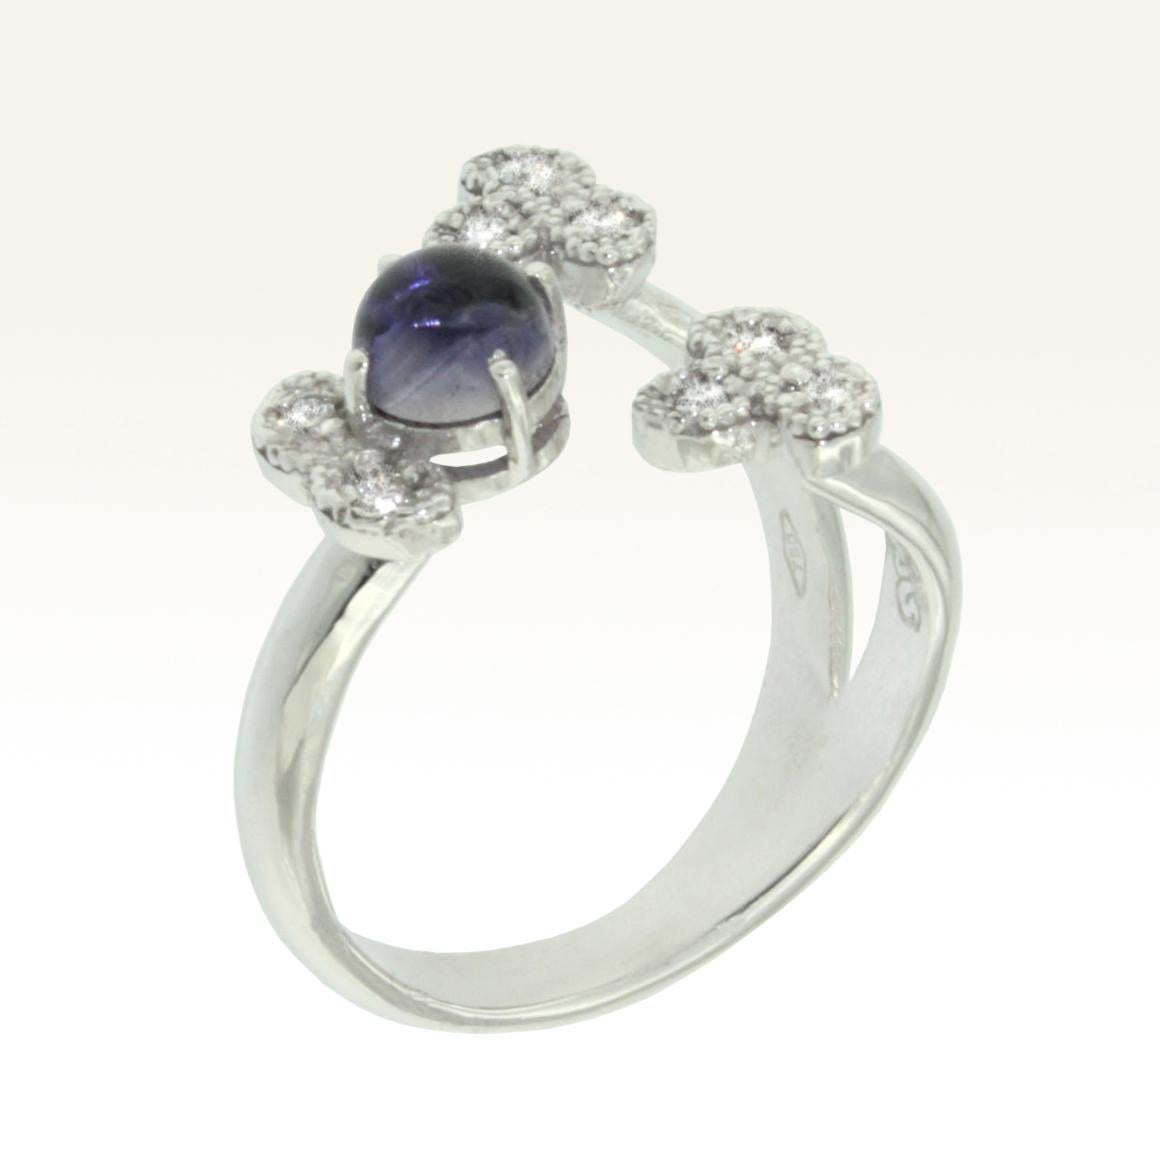 Ring in 1k white gold with Iolite (round cabochon cut, size: 5.00 mm) and Diamonds VS Color G/ H cts 0.08  g.5,50
Fashion and trendy ring made in Italy by Stanoppi Jewellery since 1948

Size of ring: EU 13 - USA 6,5

All Stanoppi Jewelry is new and